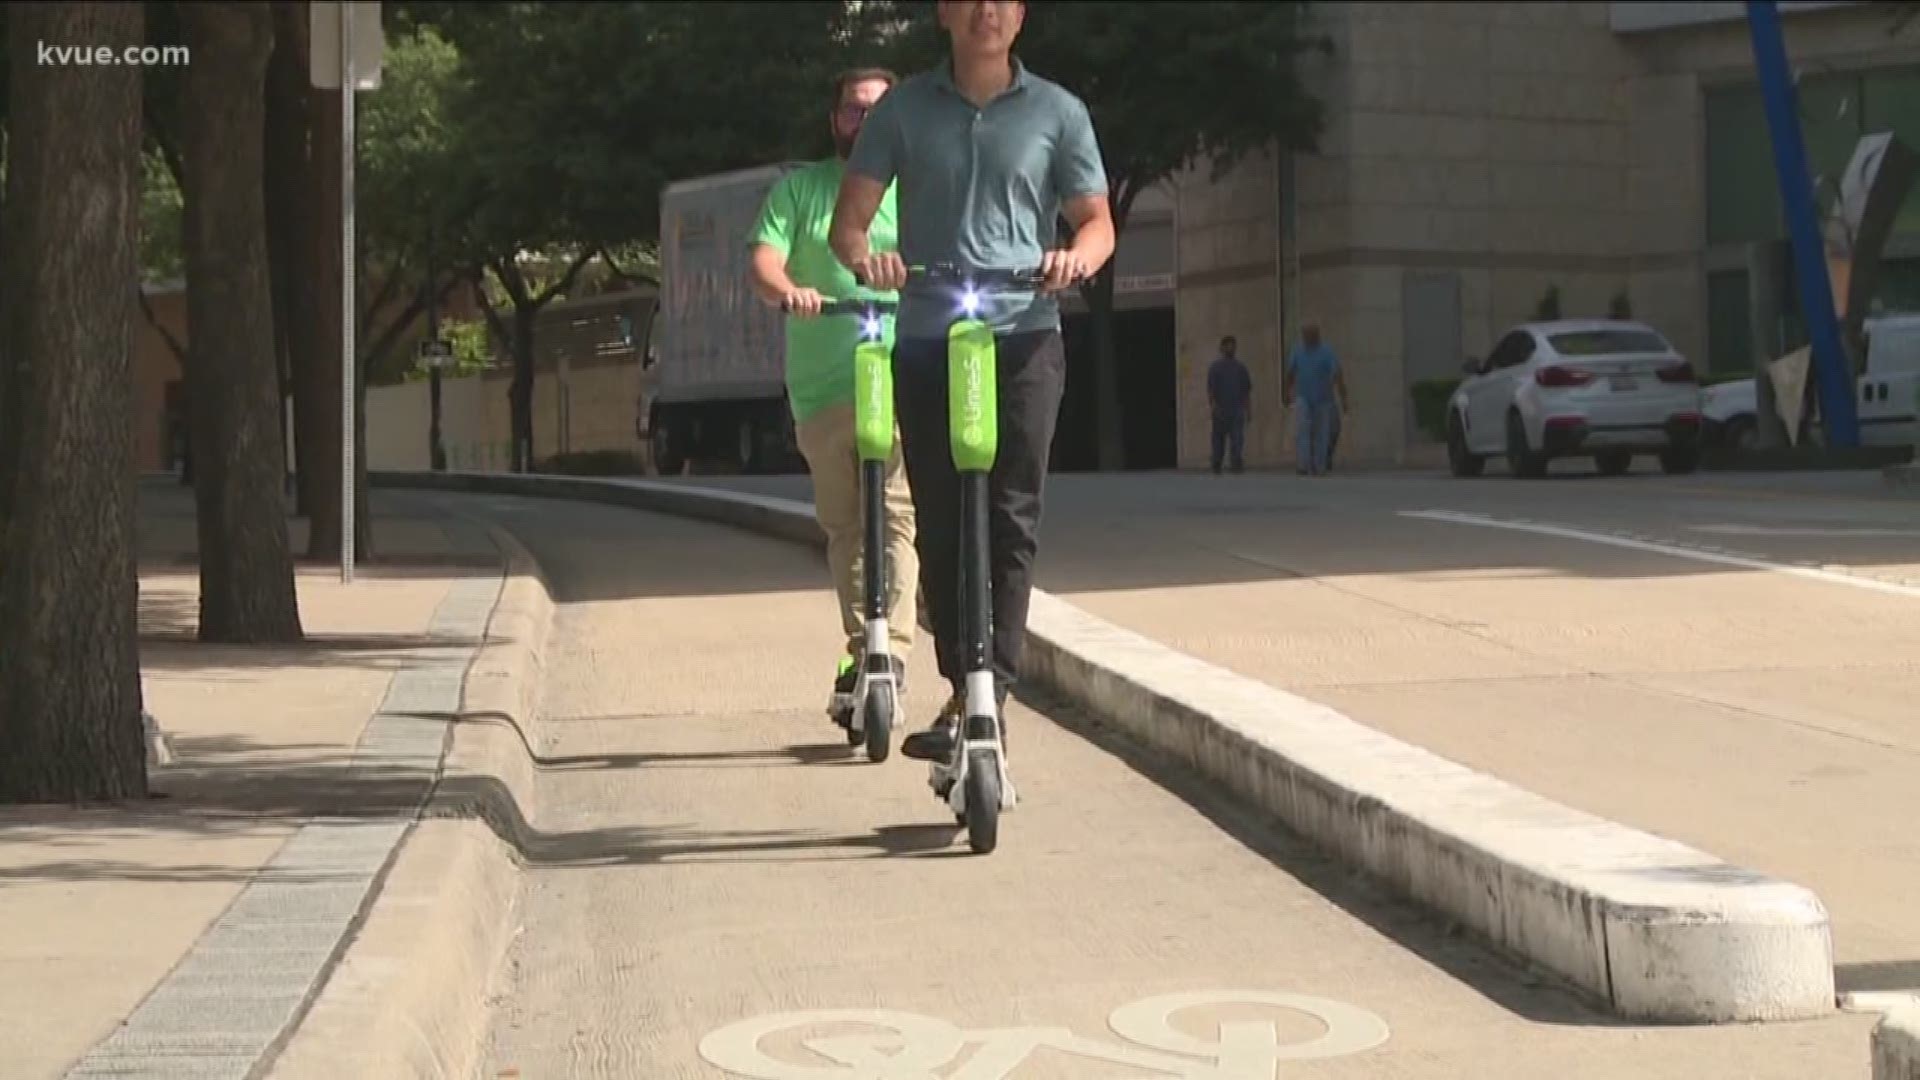 There could be new rules coming about where and how fast we can use scooters on Austin's trails.